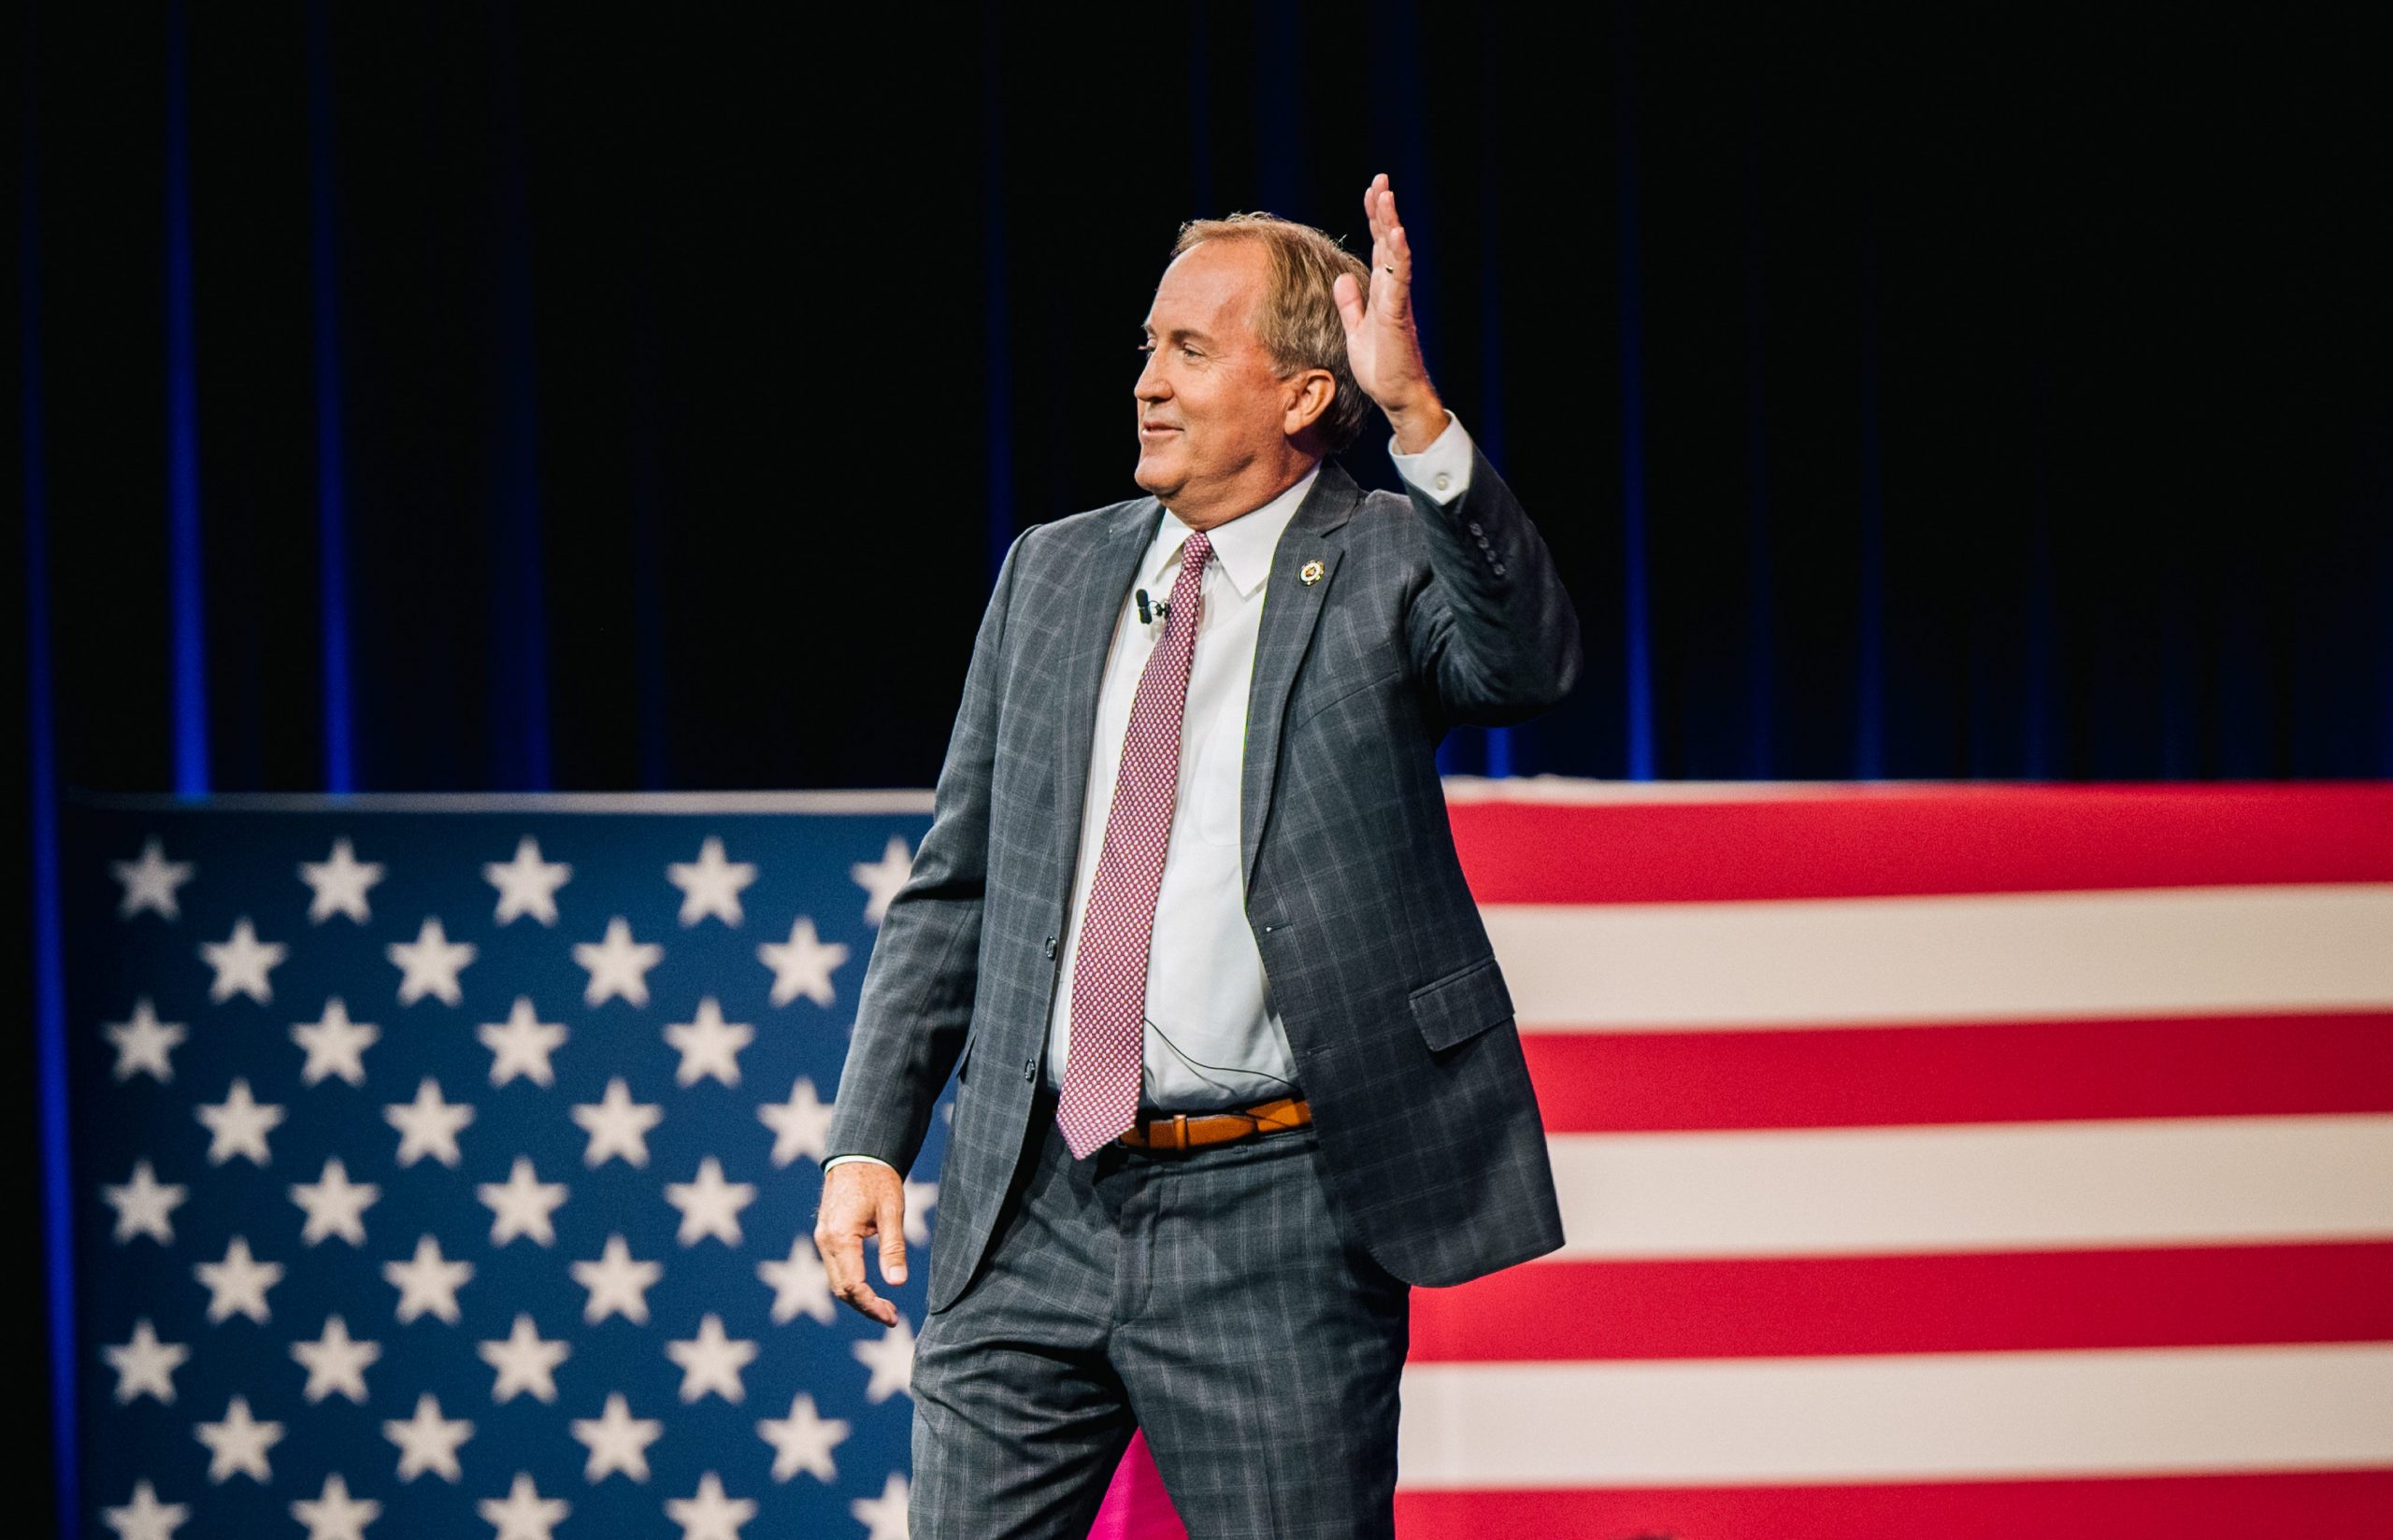 Texas Attorney General Ken Paxton waves in a suit in front of an oversized American flag